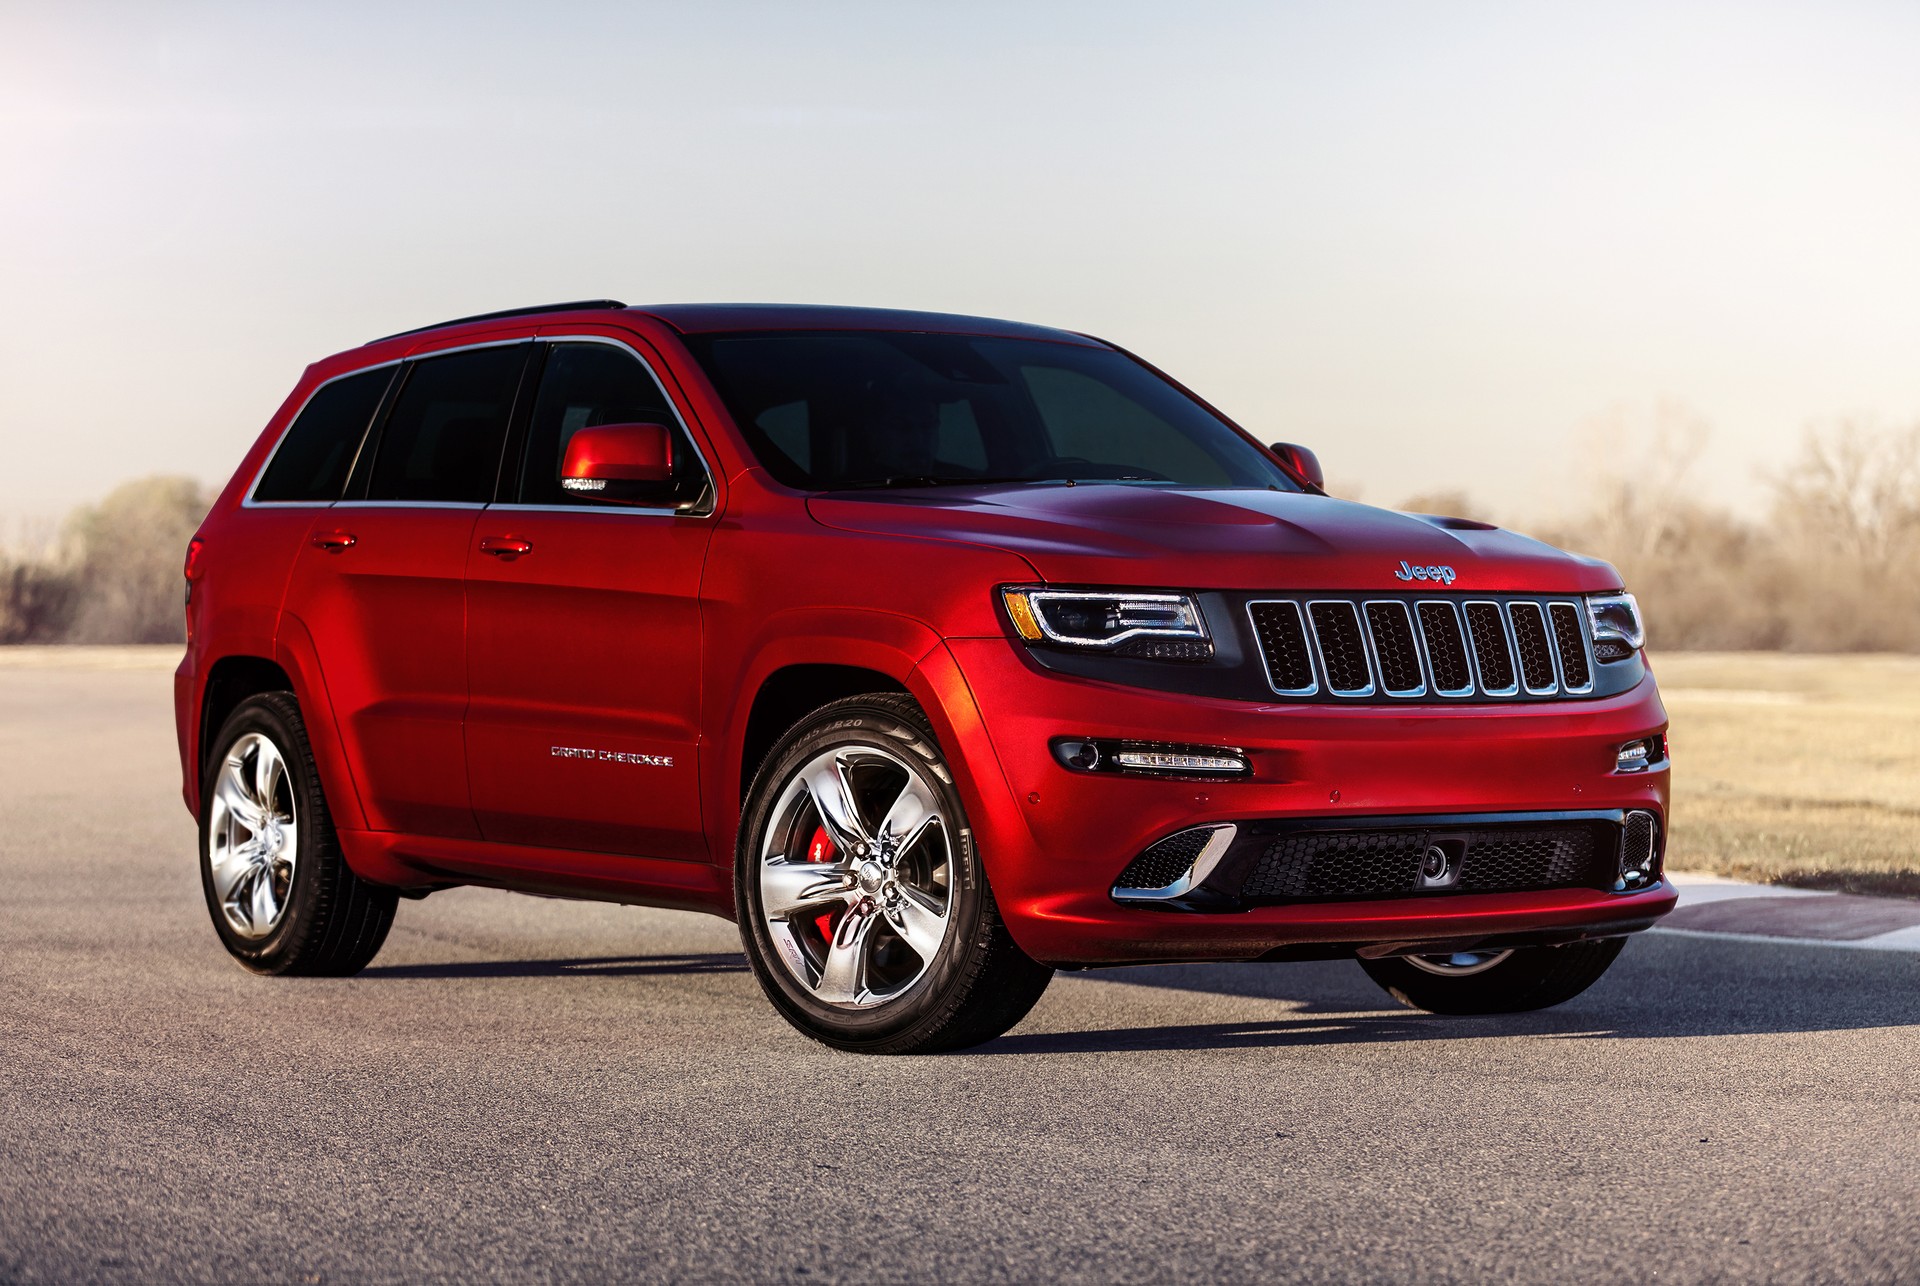 2015 Jeep Grand Cherokee Dodge Durango Recalled To Check For 